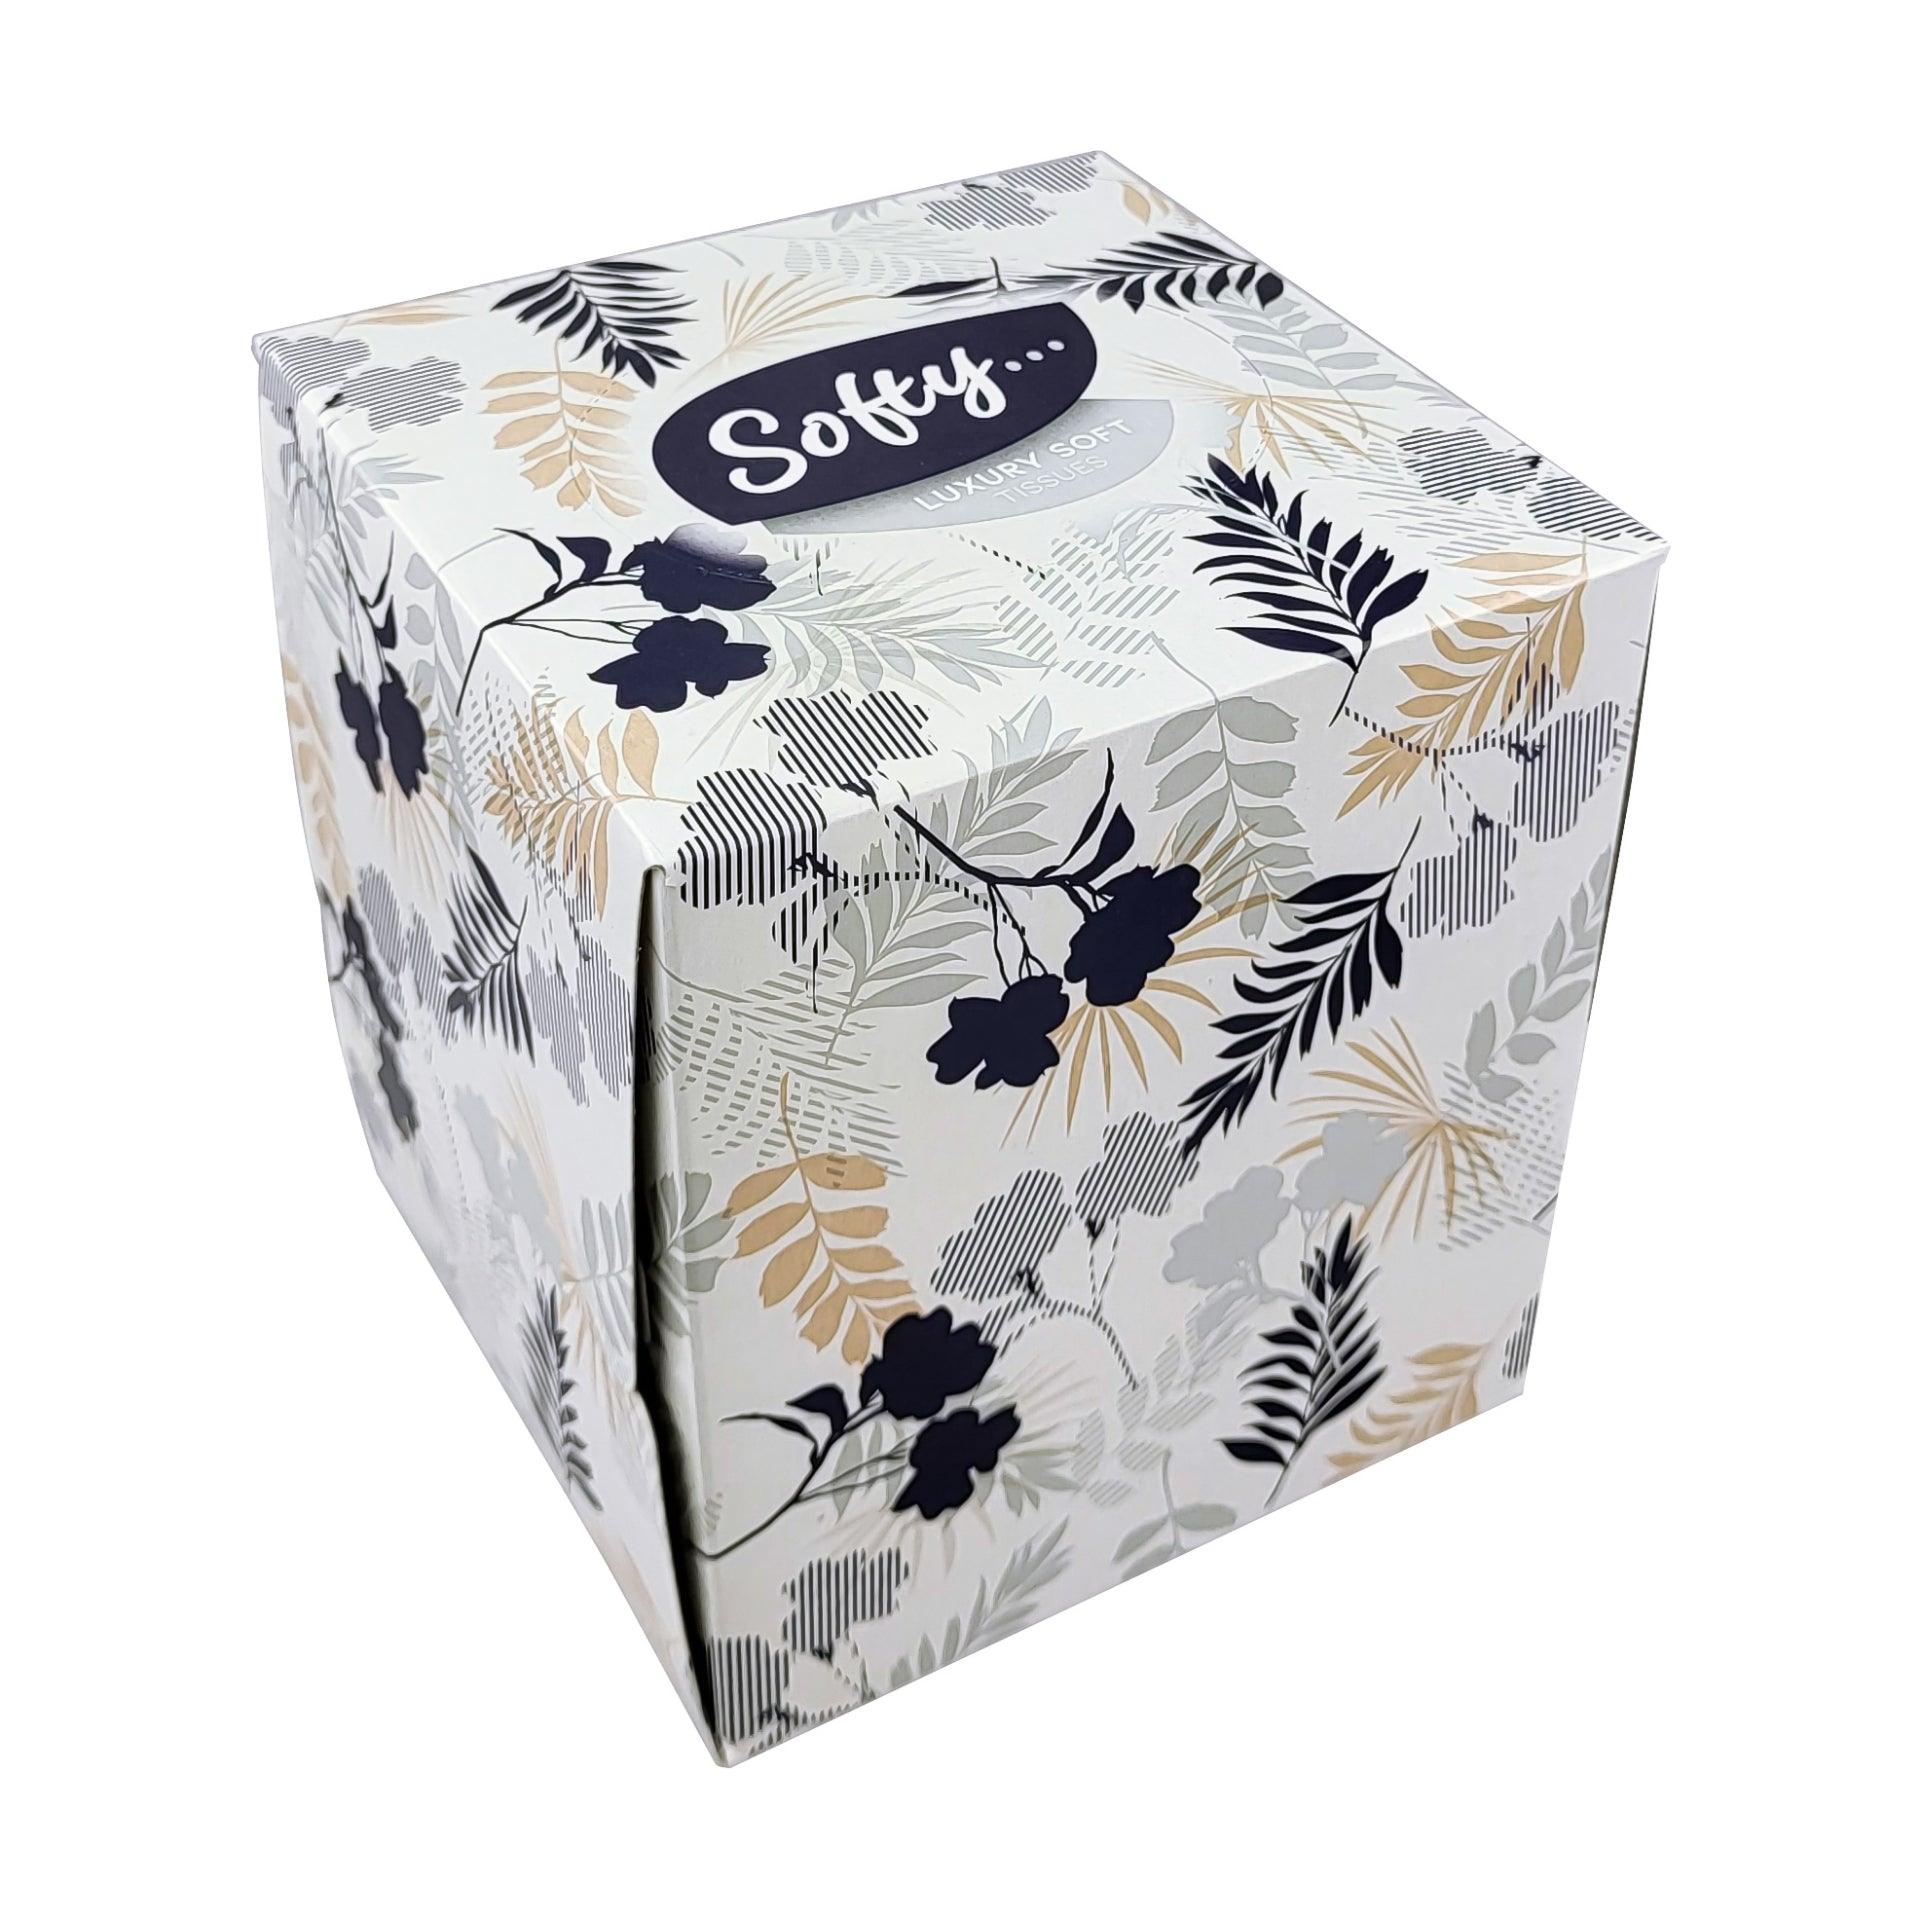 Softy - Cosmetic Cube Tissues 2ply - Box of 24 Cubes - Vending Superstore